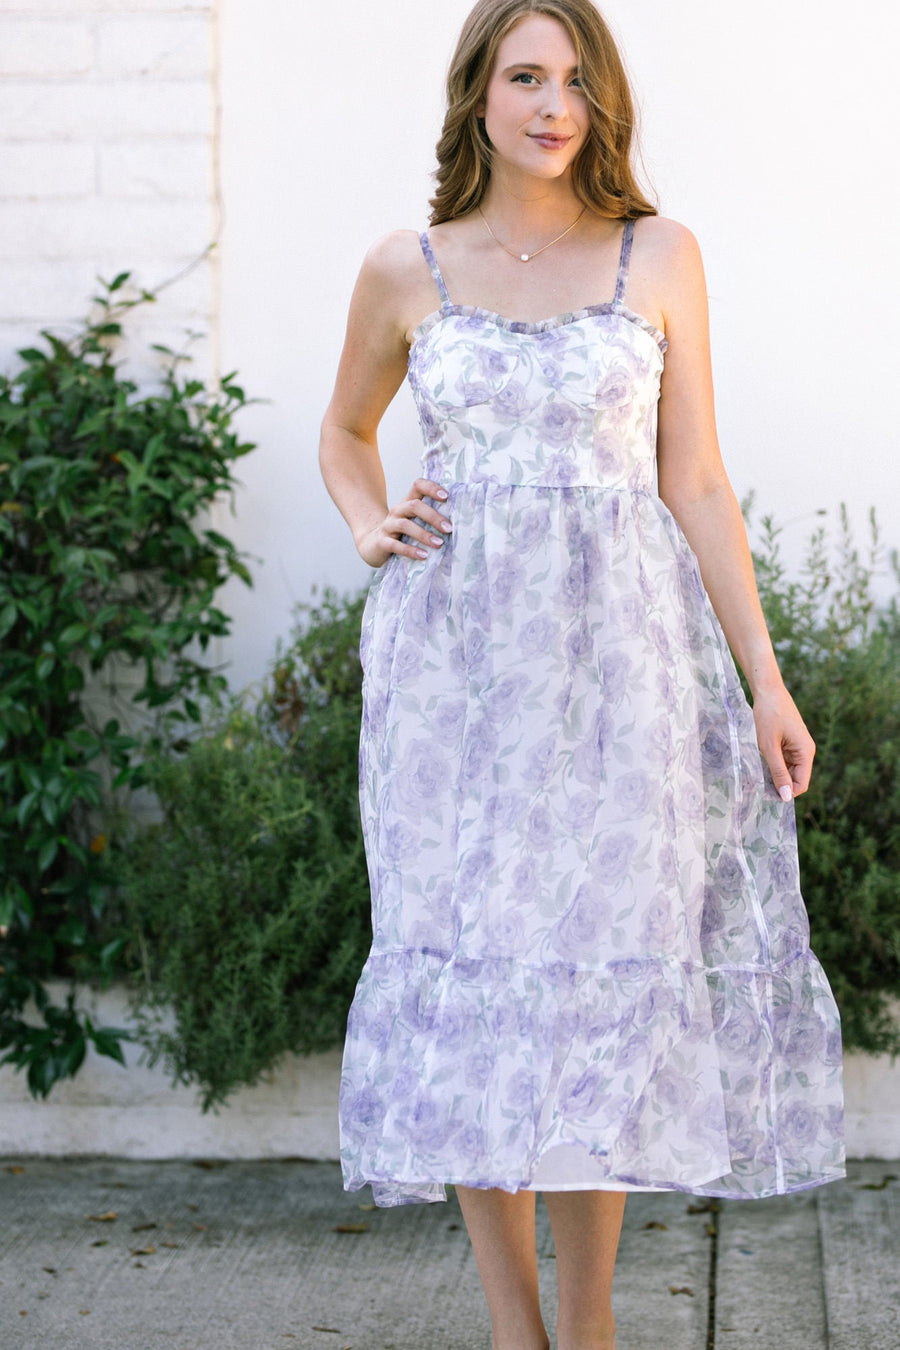 Cute Dresses, Casual Dresses, Formal Dresses – Morning Lavender – Page 2